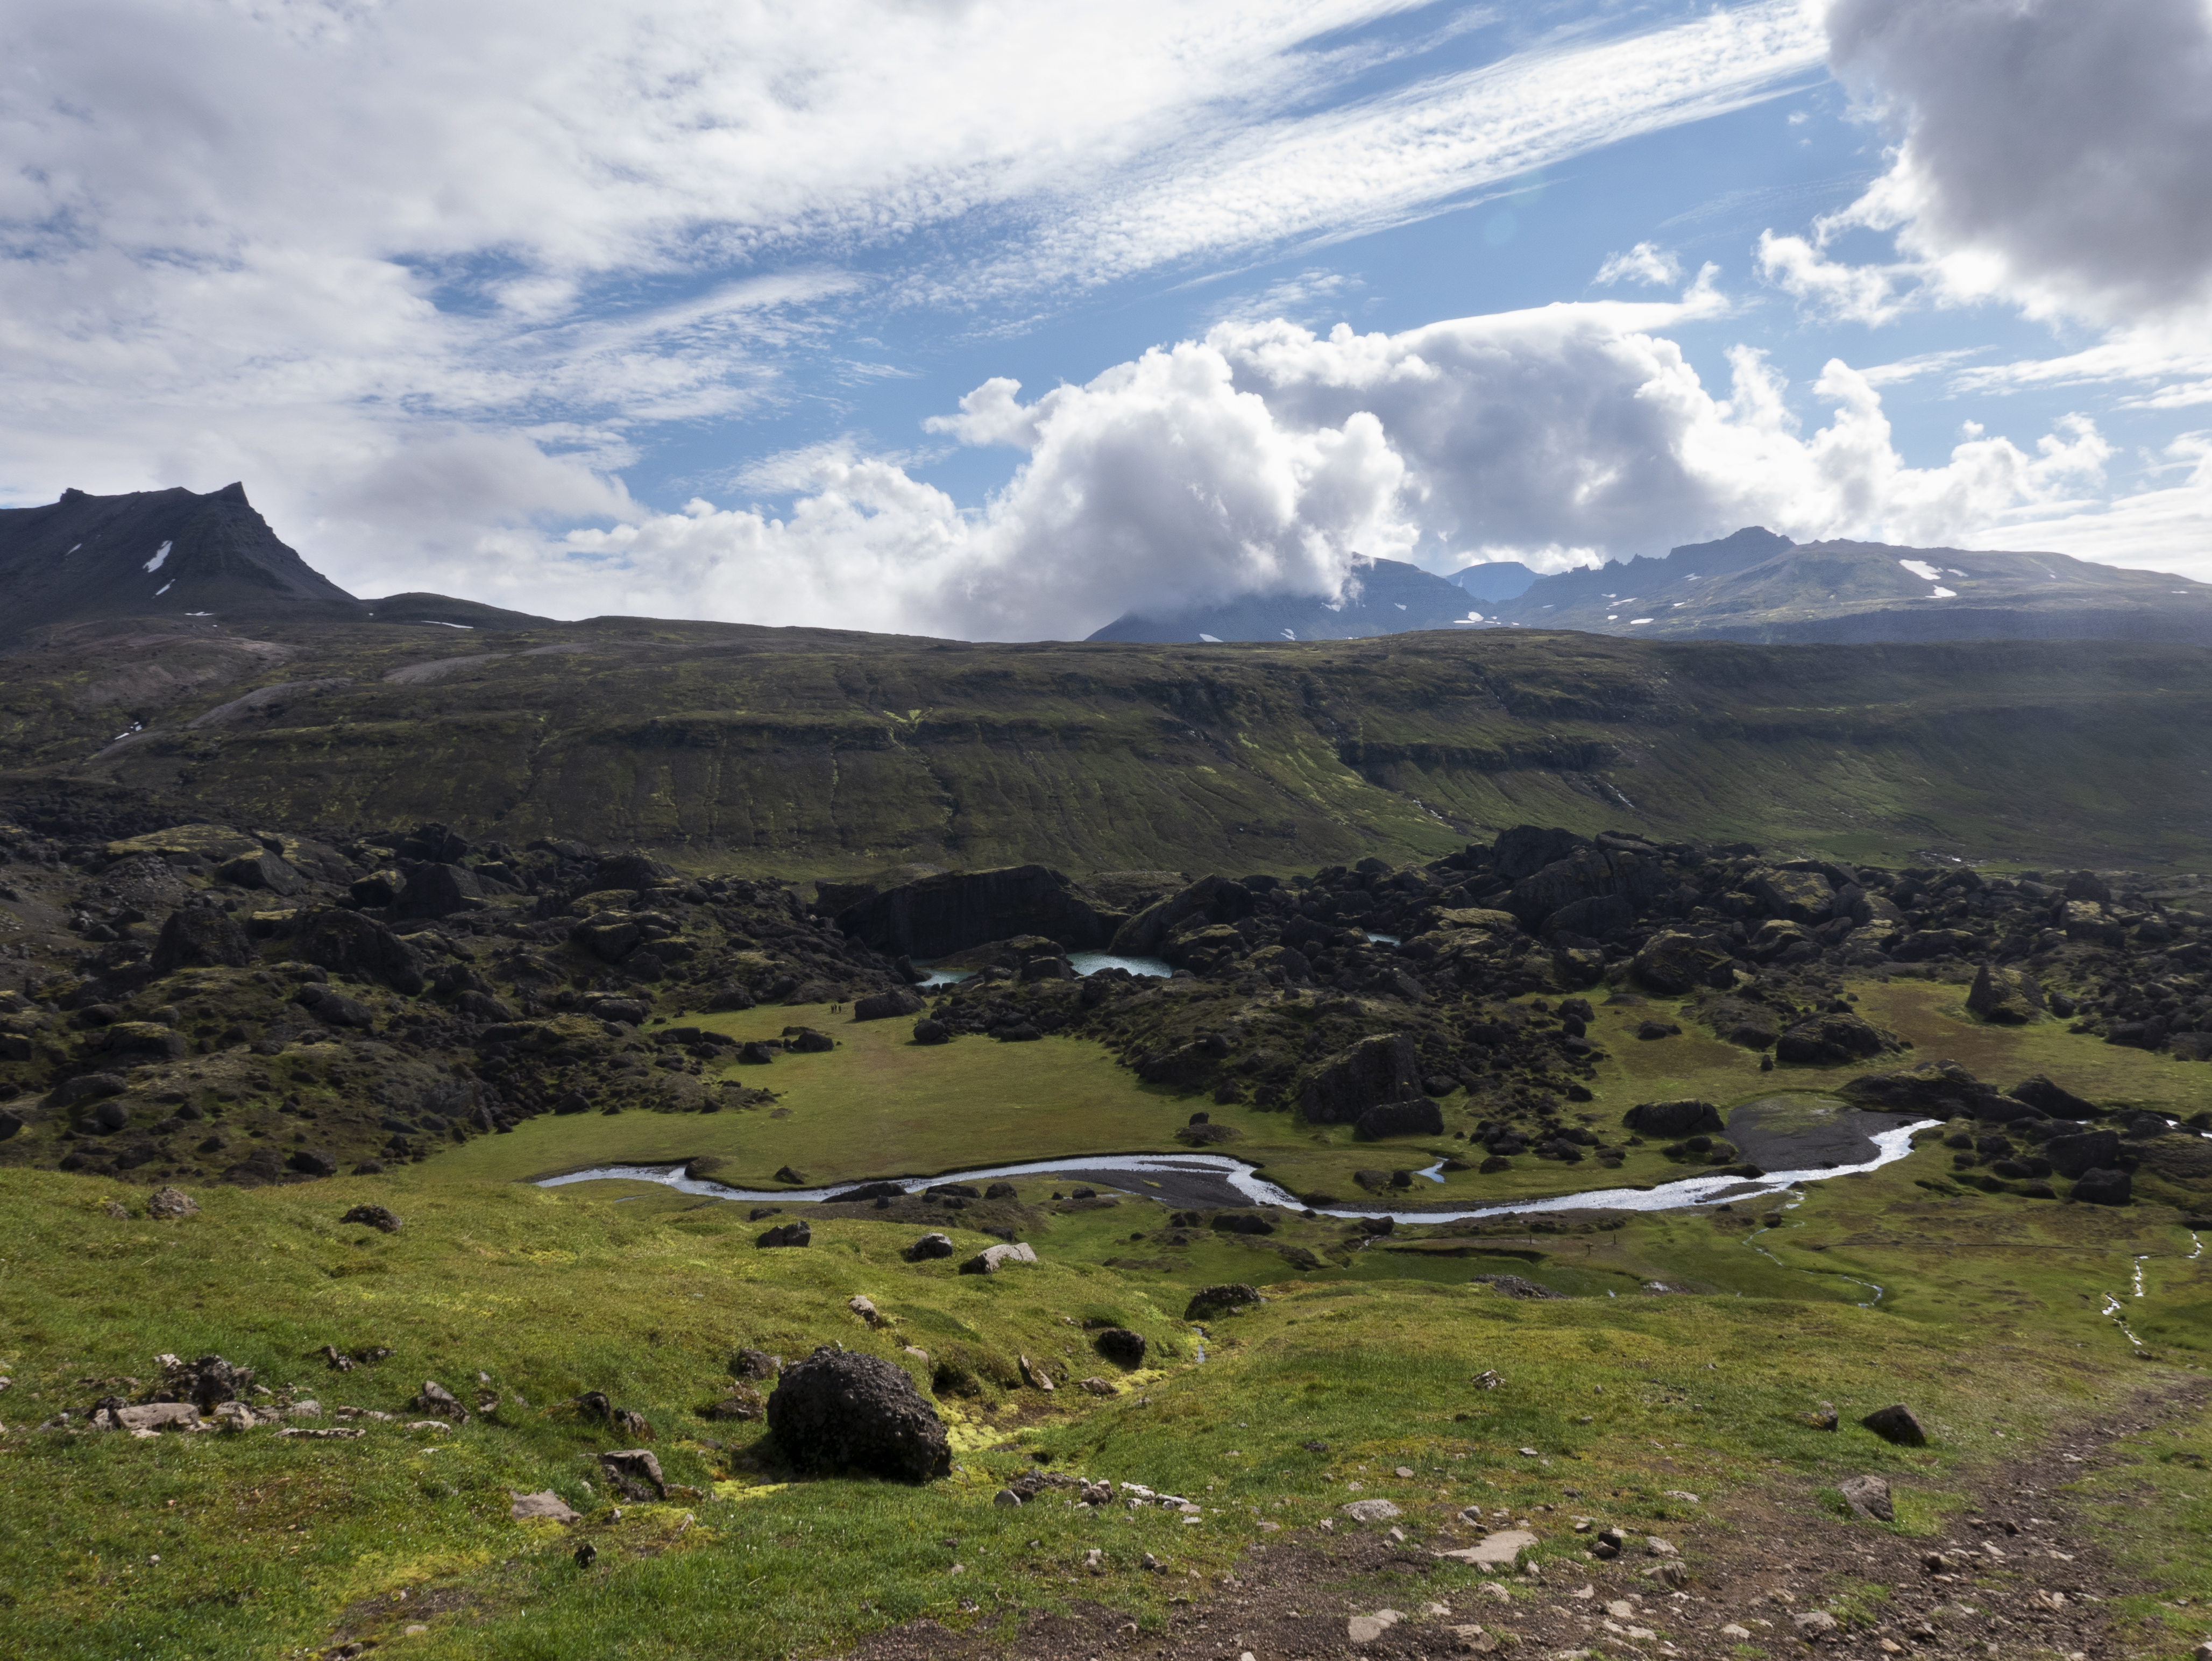 Stórurð is an oasis of meadows, ponds and giant boulders that sits below the jagged peaks of the Dyrfjöll mountains.